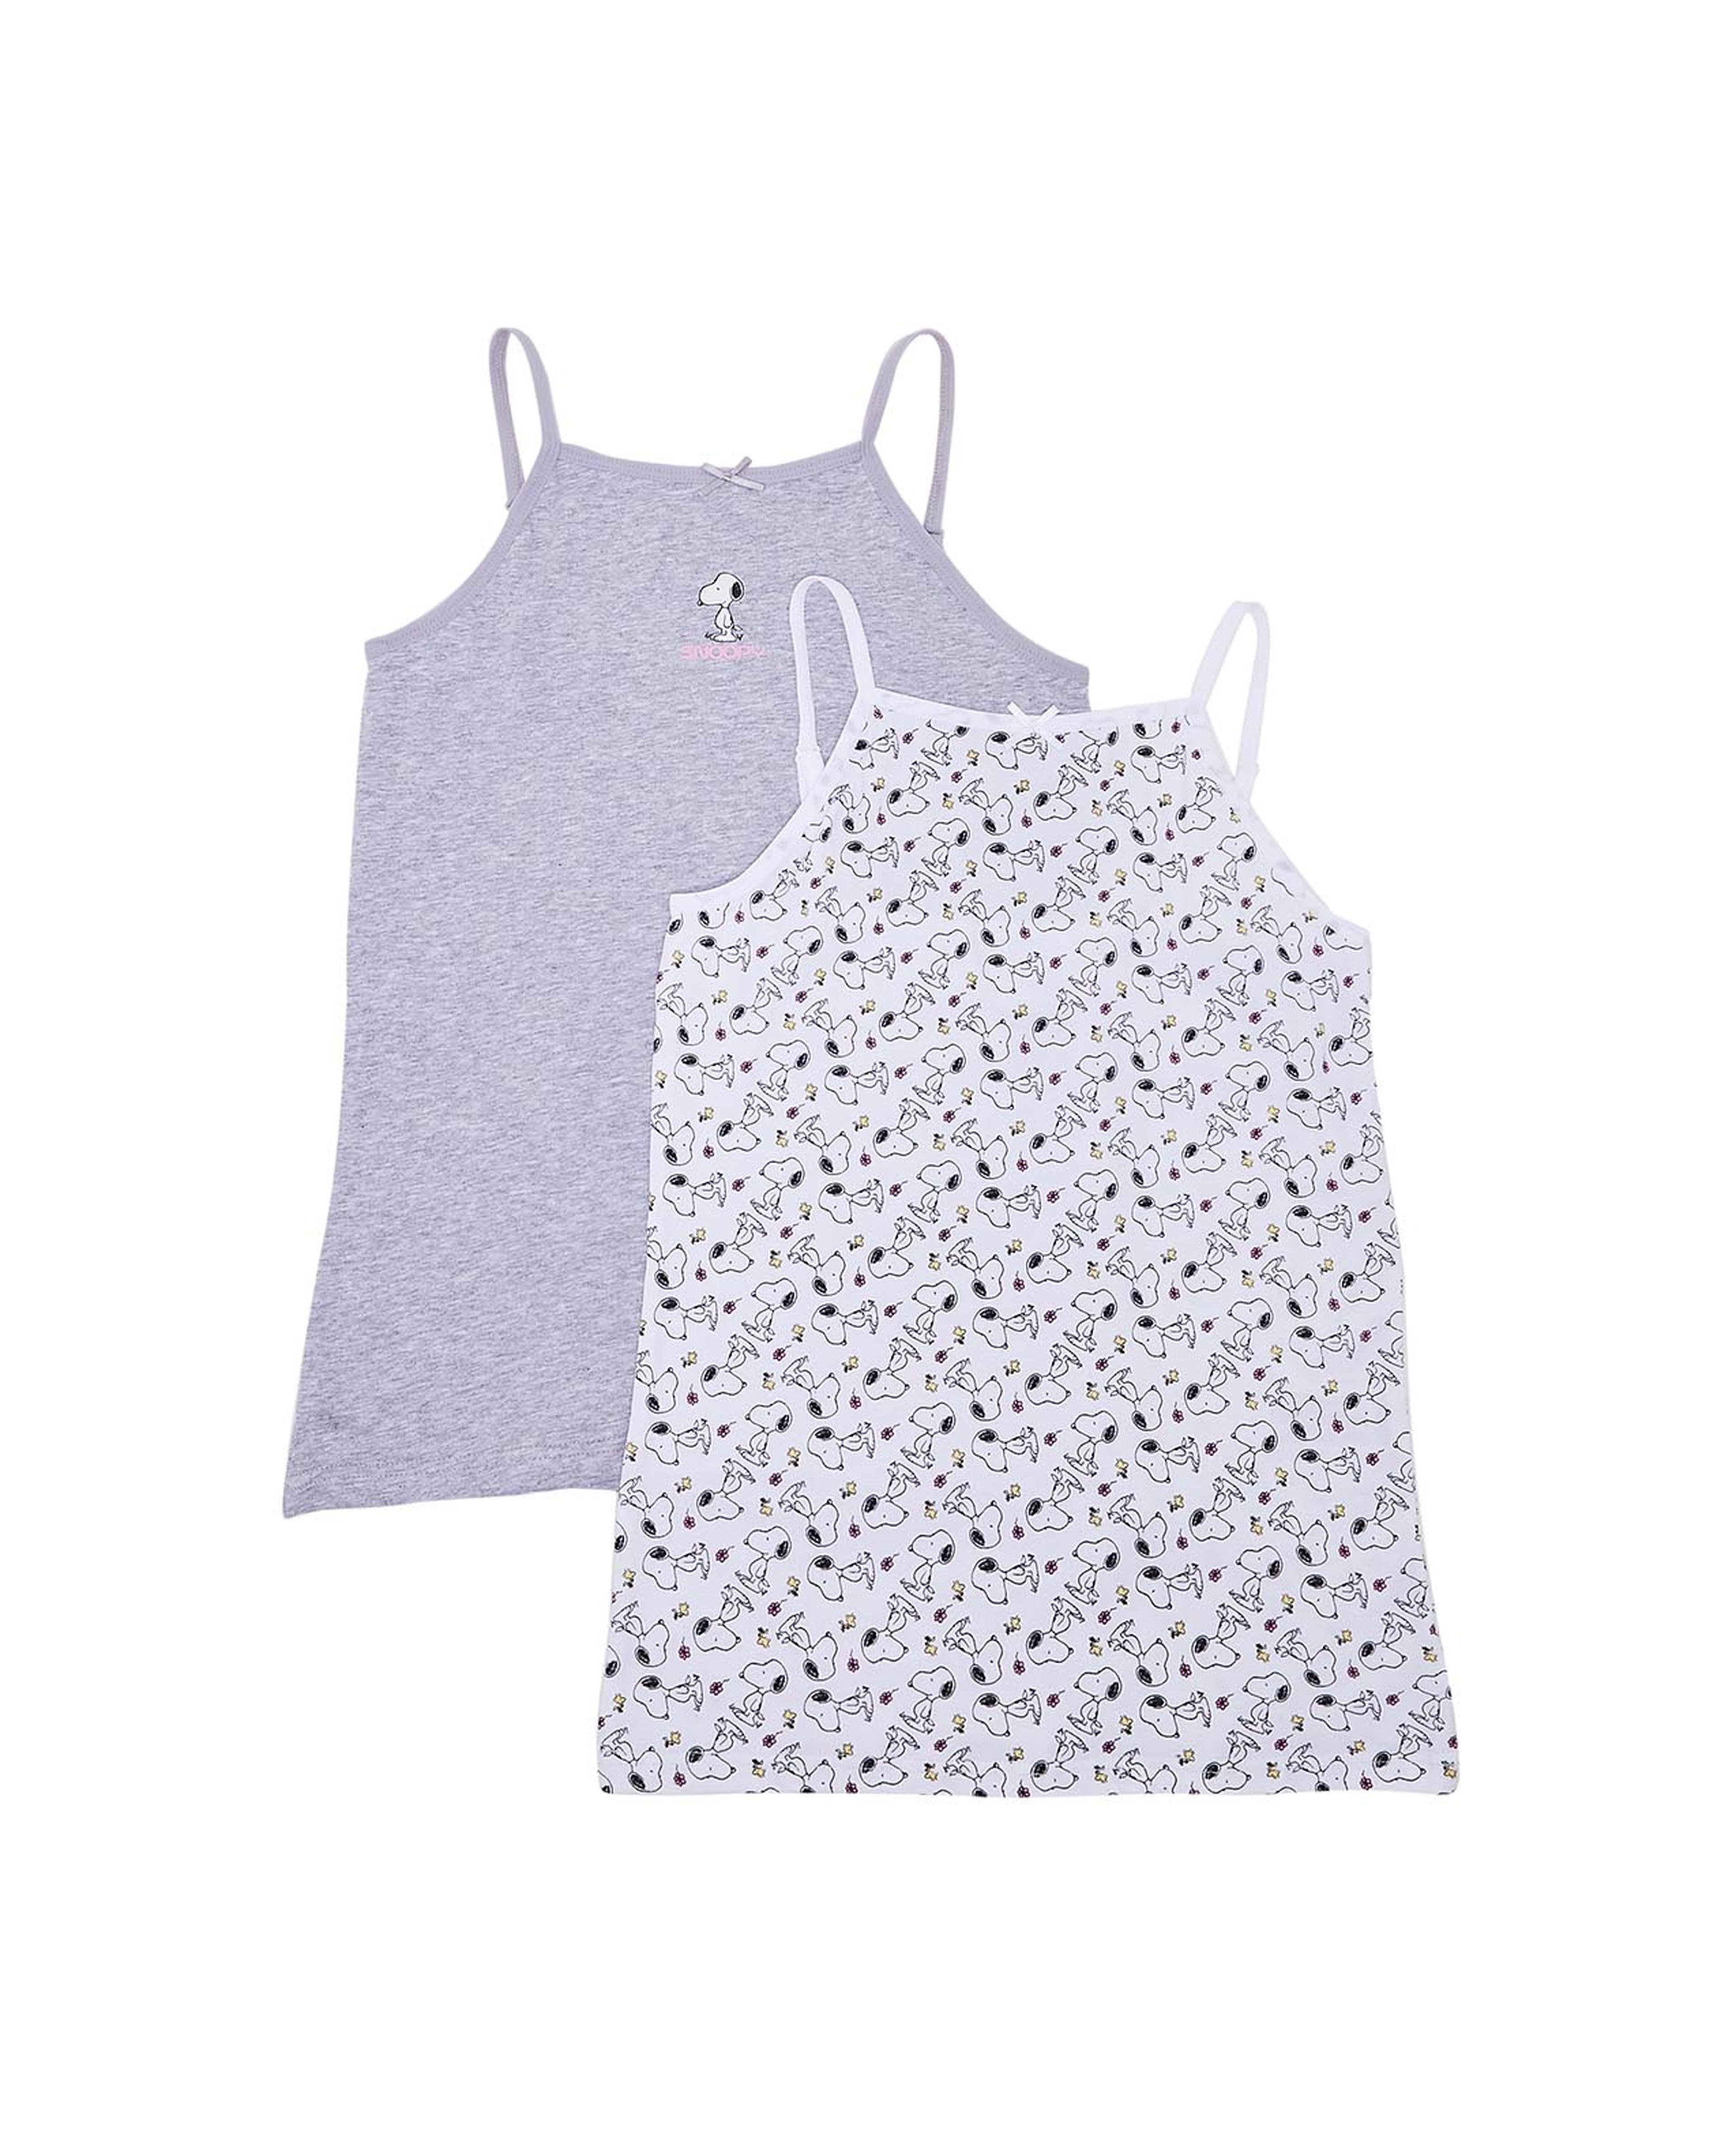 Pack of 2 Snoopy Printed Camisoles